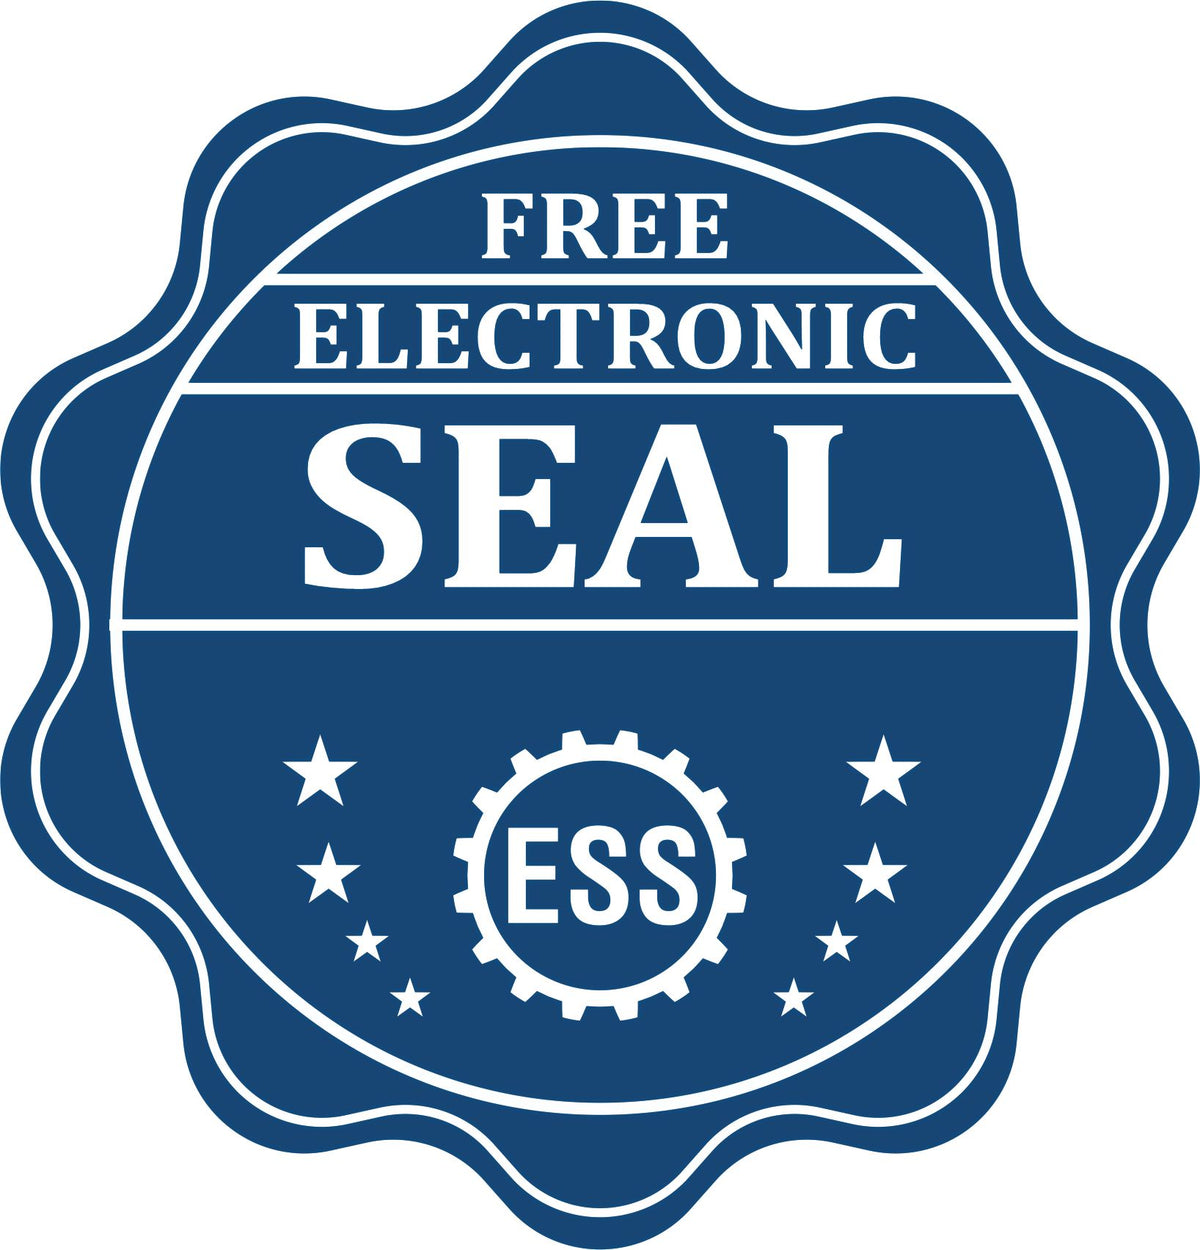 A badge showing a free electronic seal for the Connecticut Desk Architect Embossing Seal with stars and the ESS gear on the emblem.